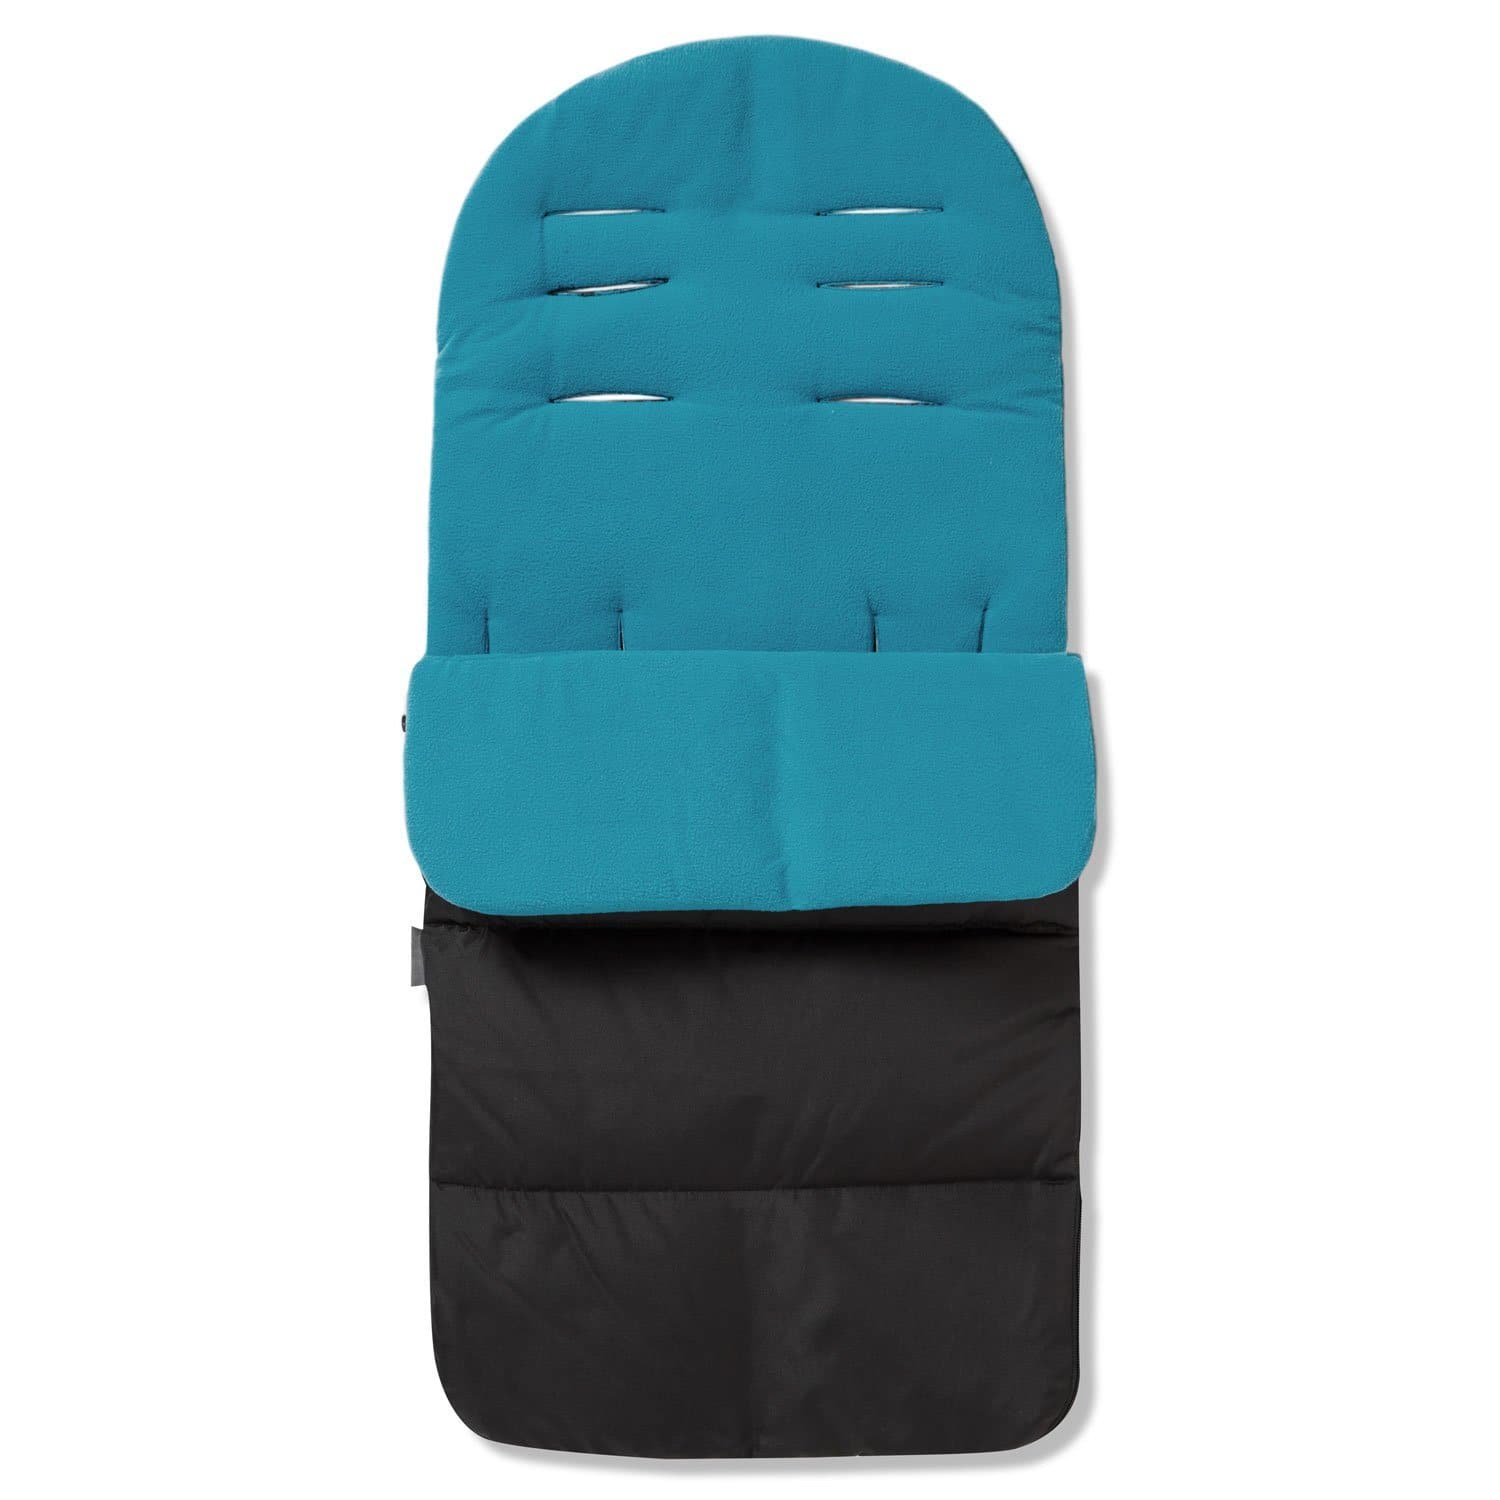 Premium Footmuff / Cosy Toes Compatible with Orbit Baby - Ocean Blue / Fits All Models | For Your Little One